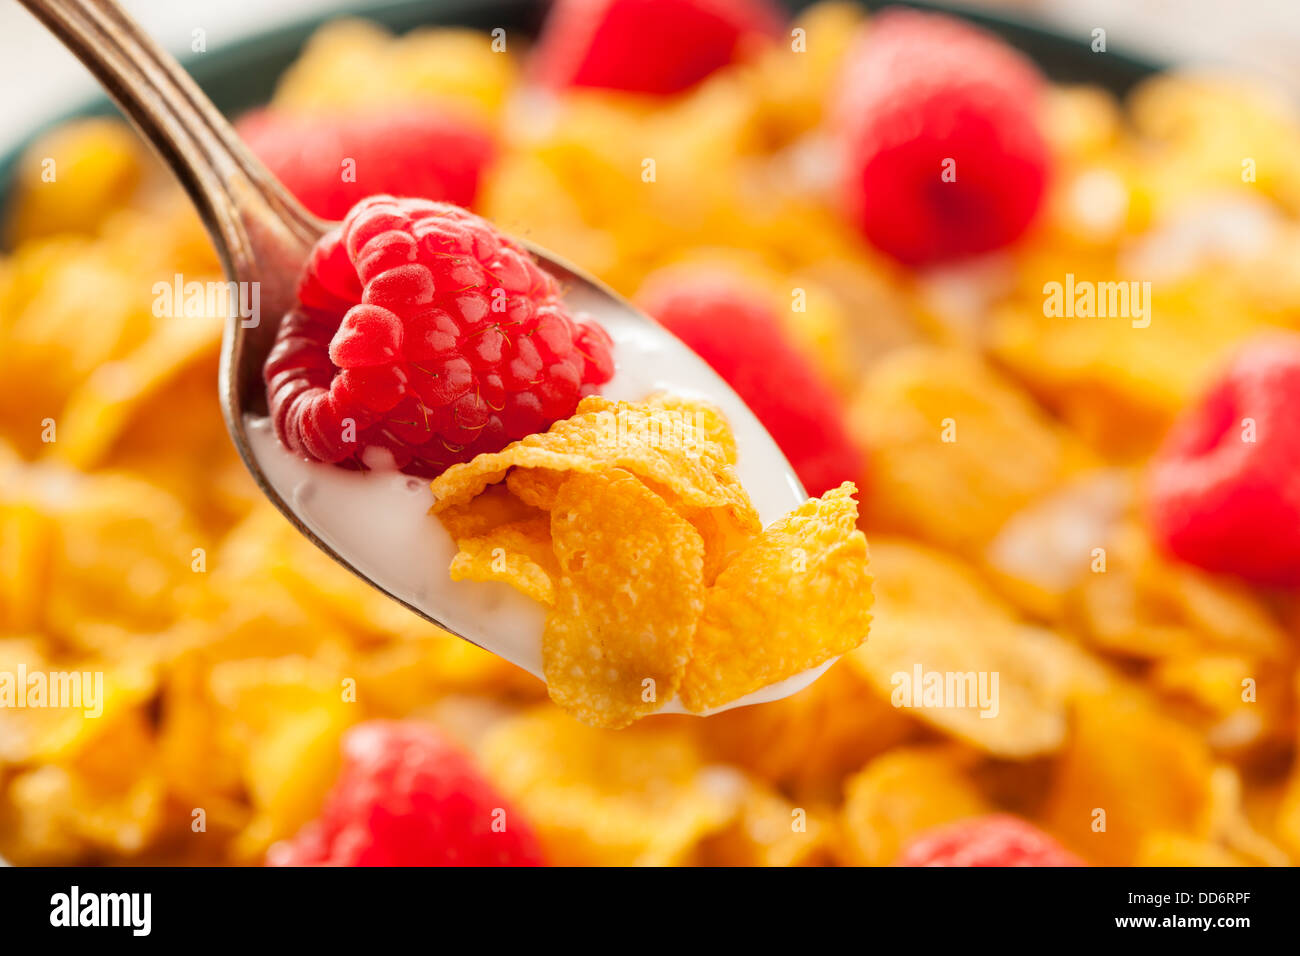 Healthy Cornflake Cereal for Breakfast with Berries Stock Photo - Alamy